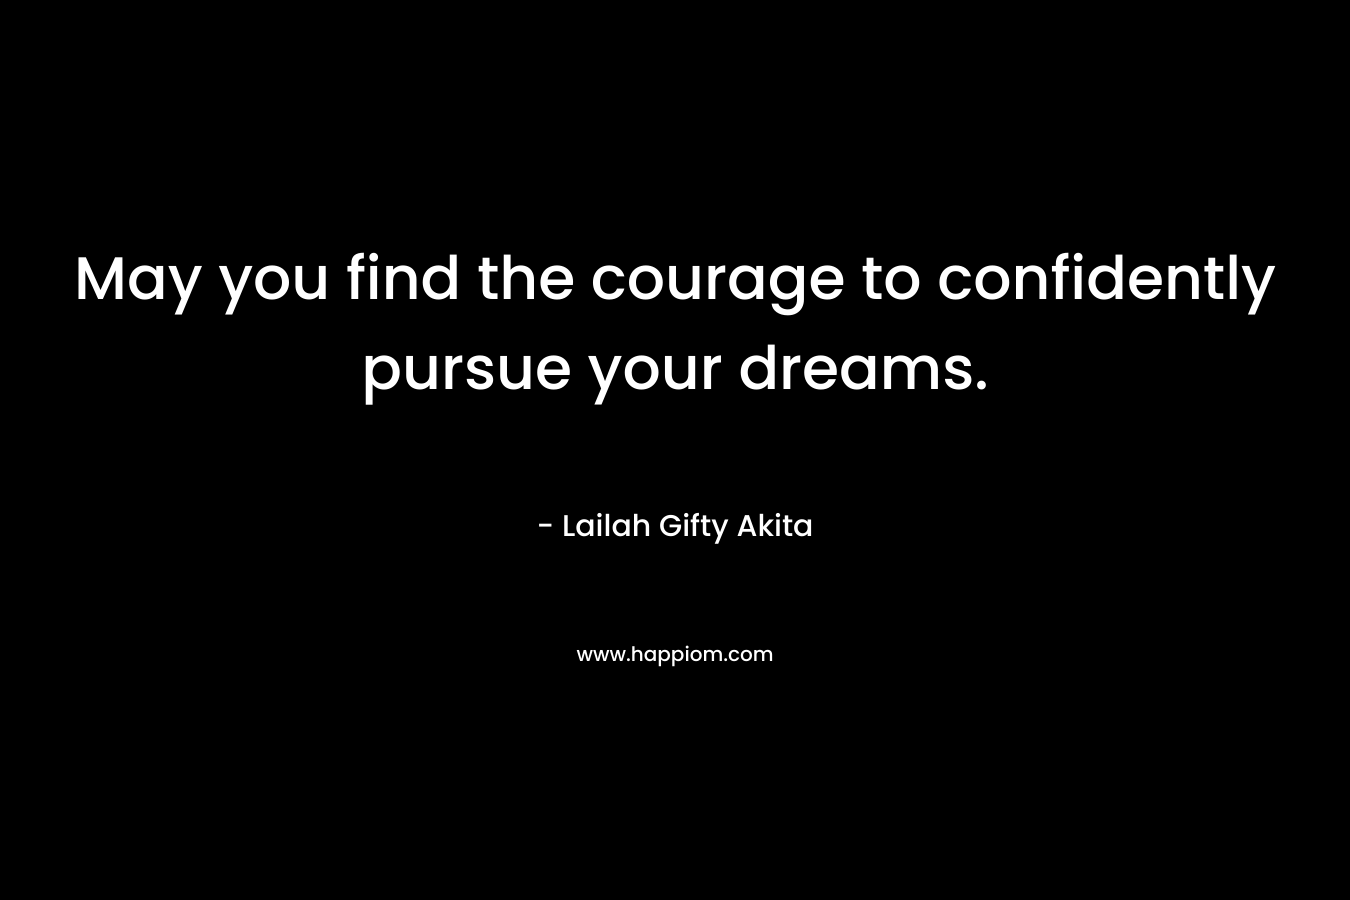 May you find the courage to confidently pursue your dreams.